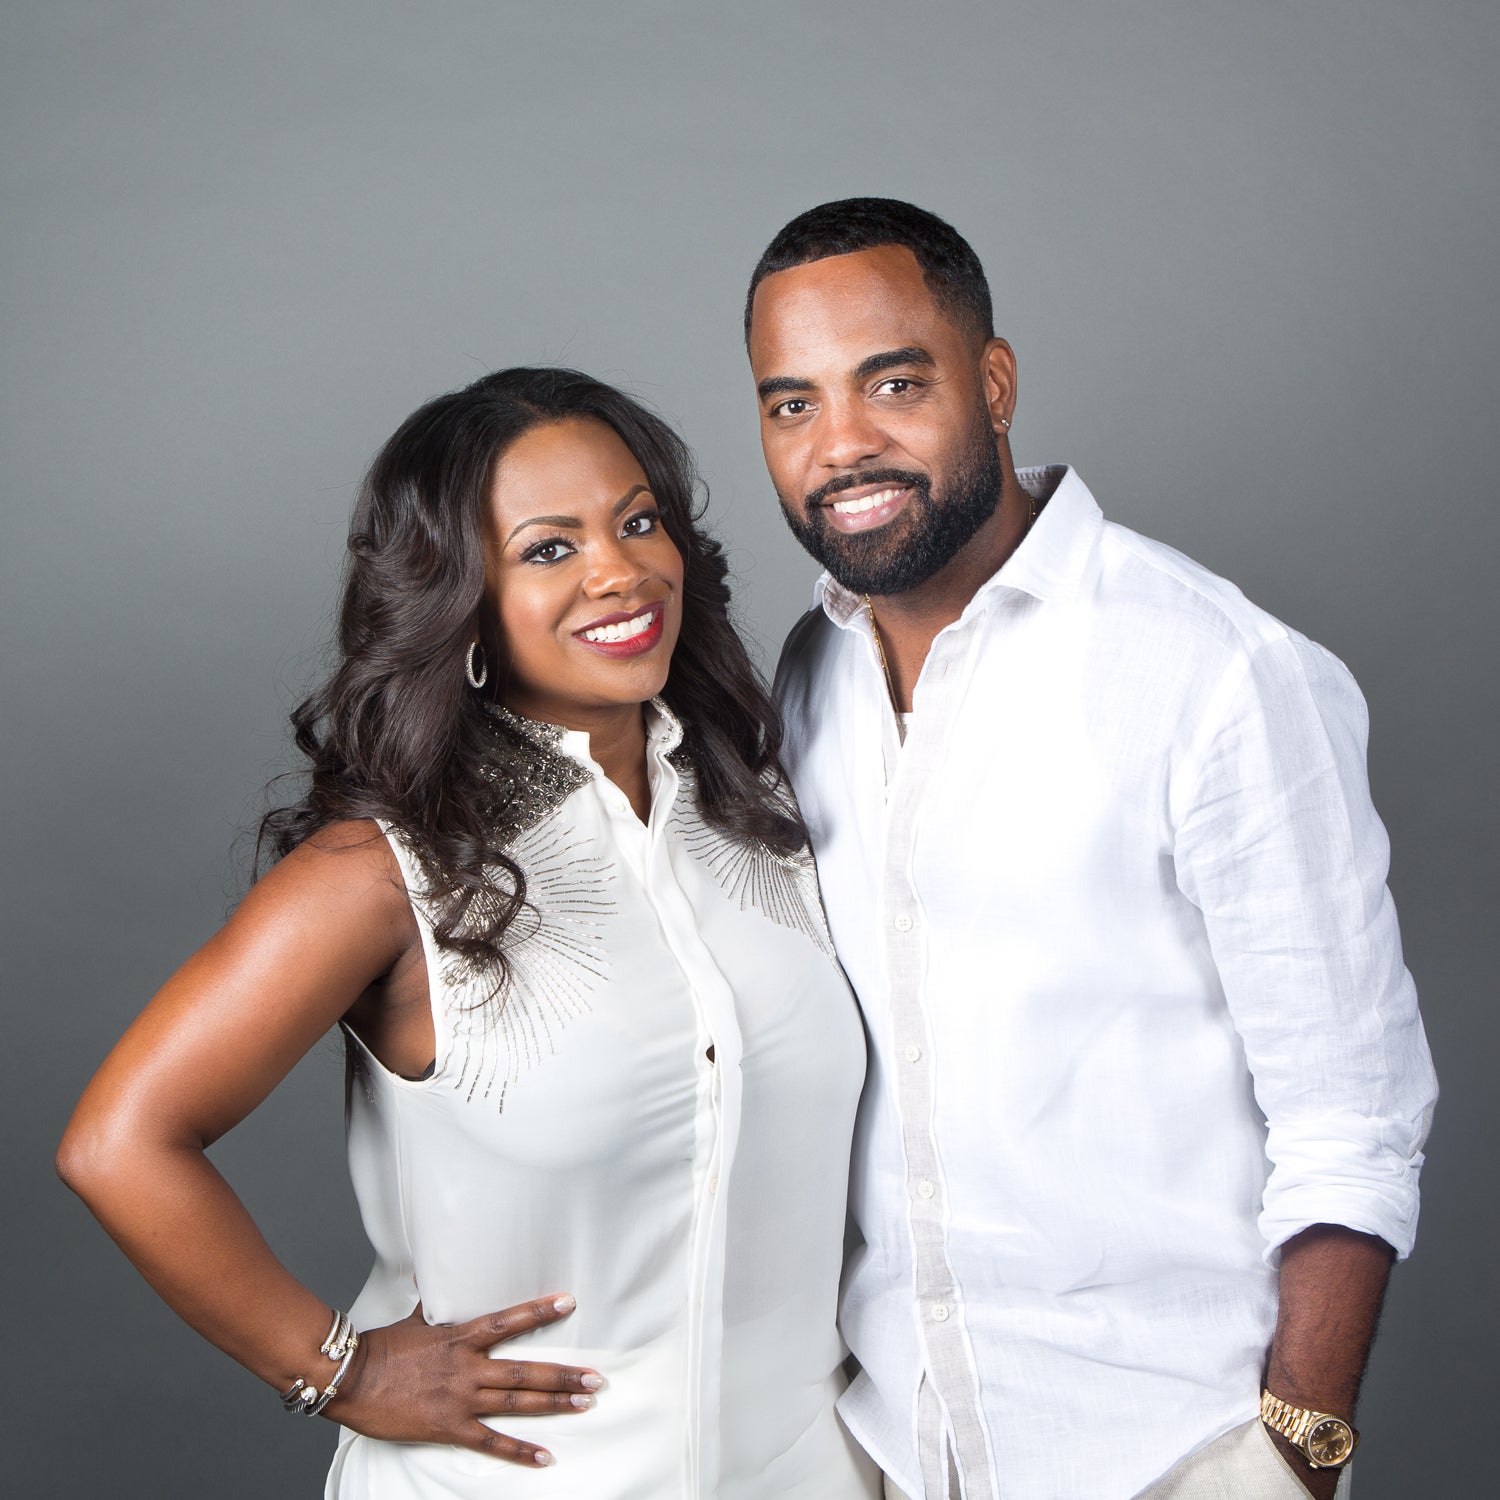 Kandi Burruss Says She and Husband Todd Tucker Were Unjustly Kicked Off Airline 'This S--t Is Crazy'
